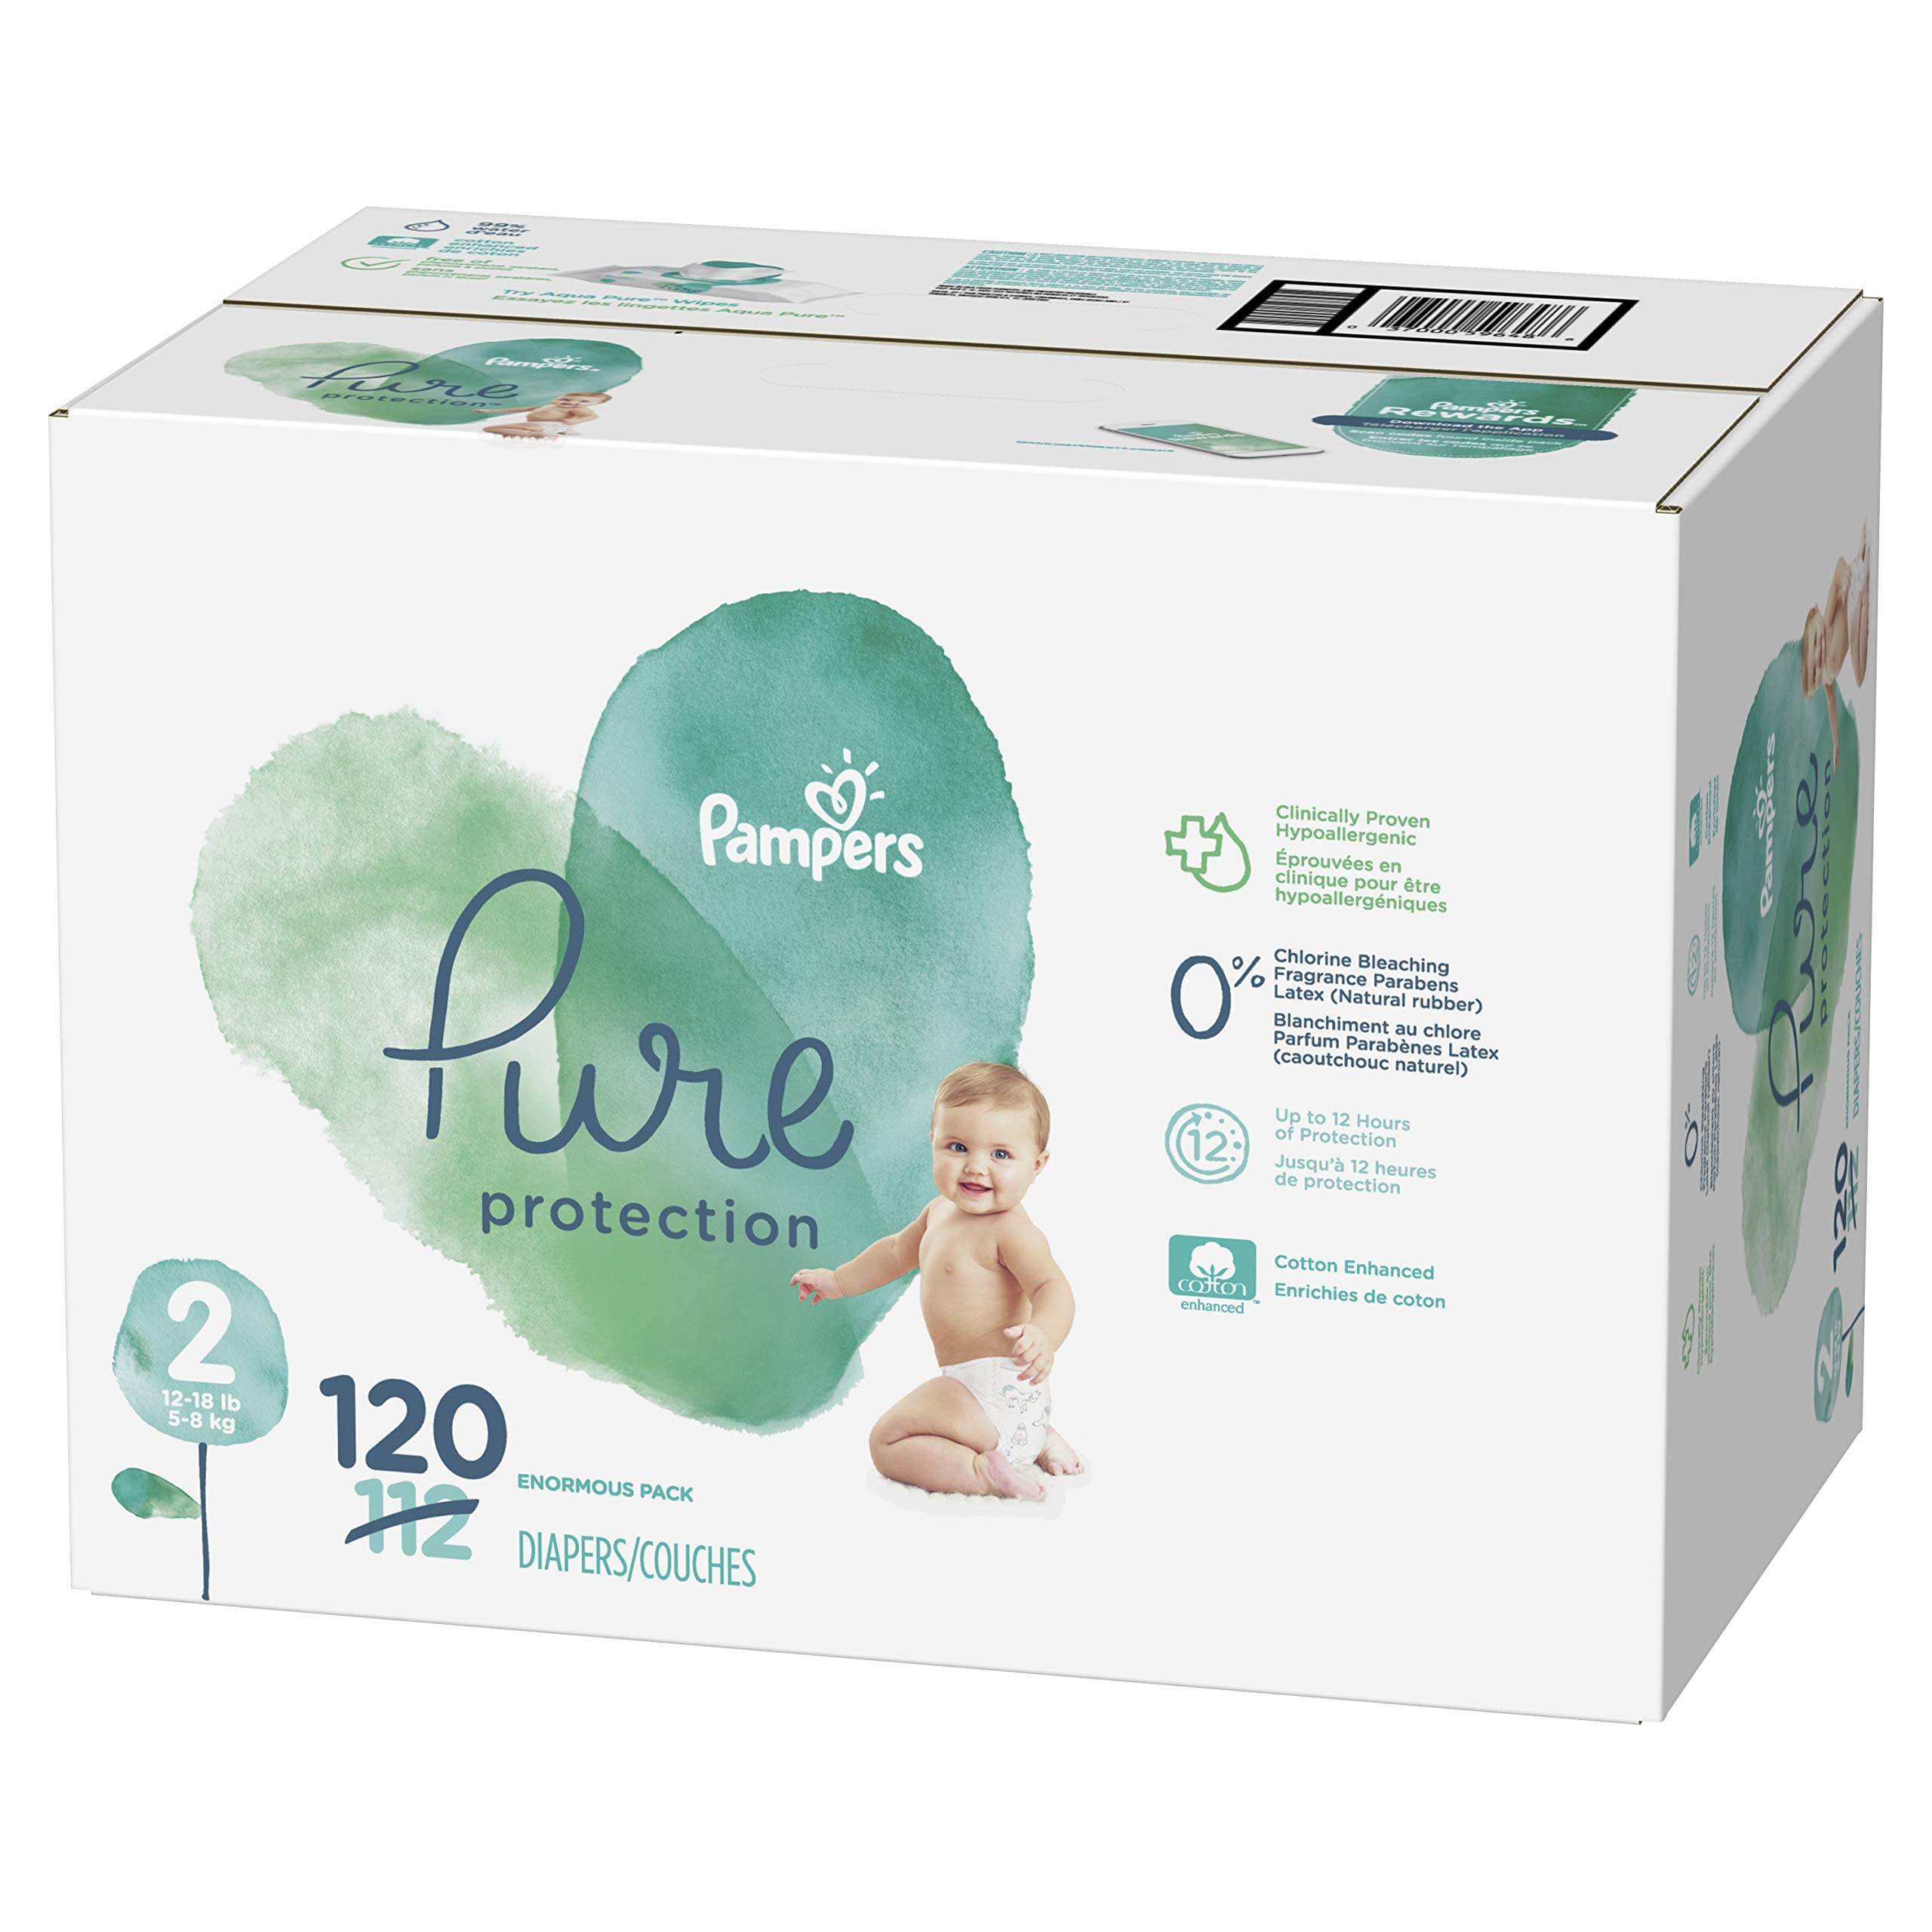 Diapers Size 2, 120 Count - Pampers Pure Protection Disposable Baby Diapers, Hypoallergenic and Unscented Protection, Enormous Pack (Packaging & Prints May Vary)